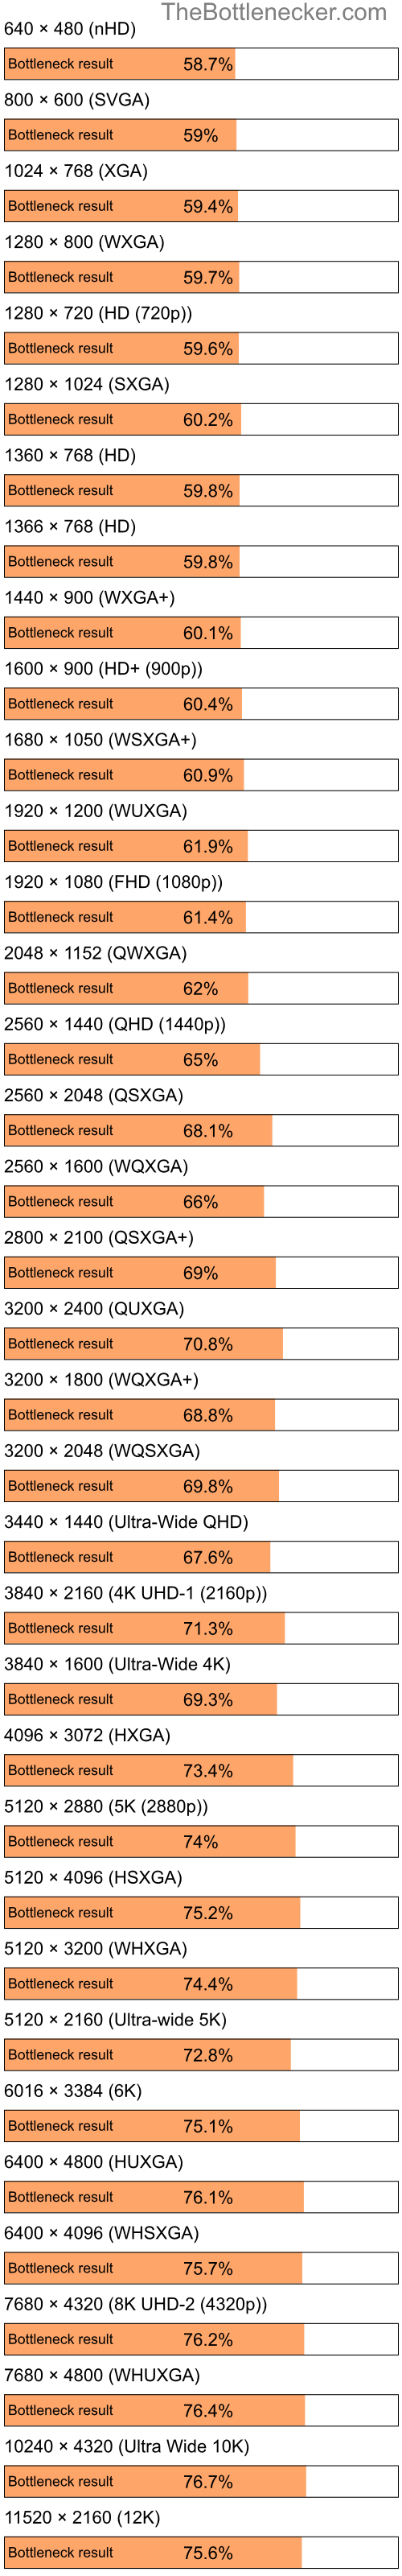 Bottleneck results by resolution for Intel Pentium 4 and NVIDIA GeForce 9100 in Processor Intense Tasks